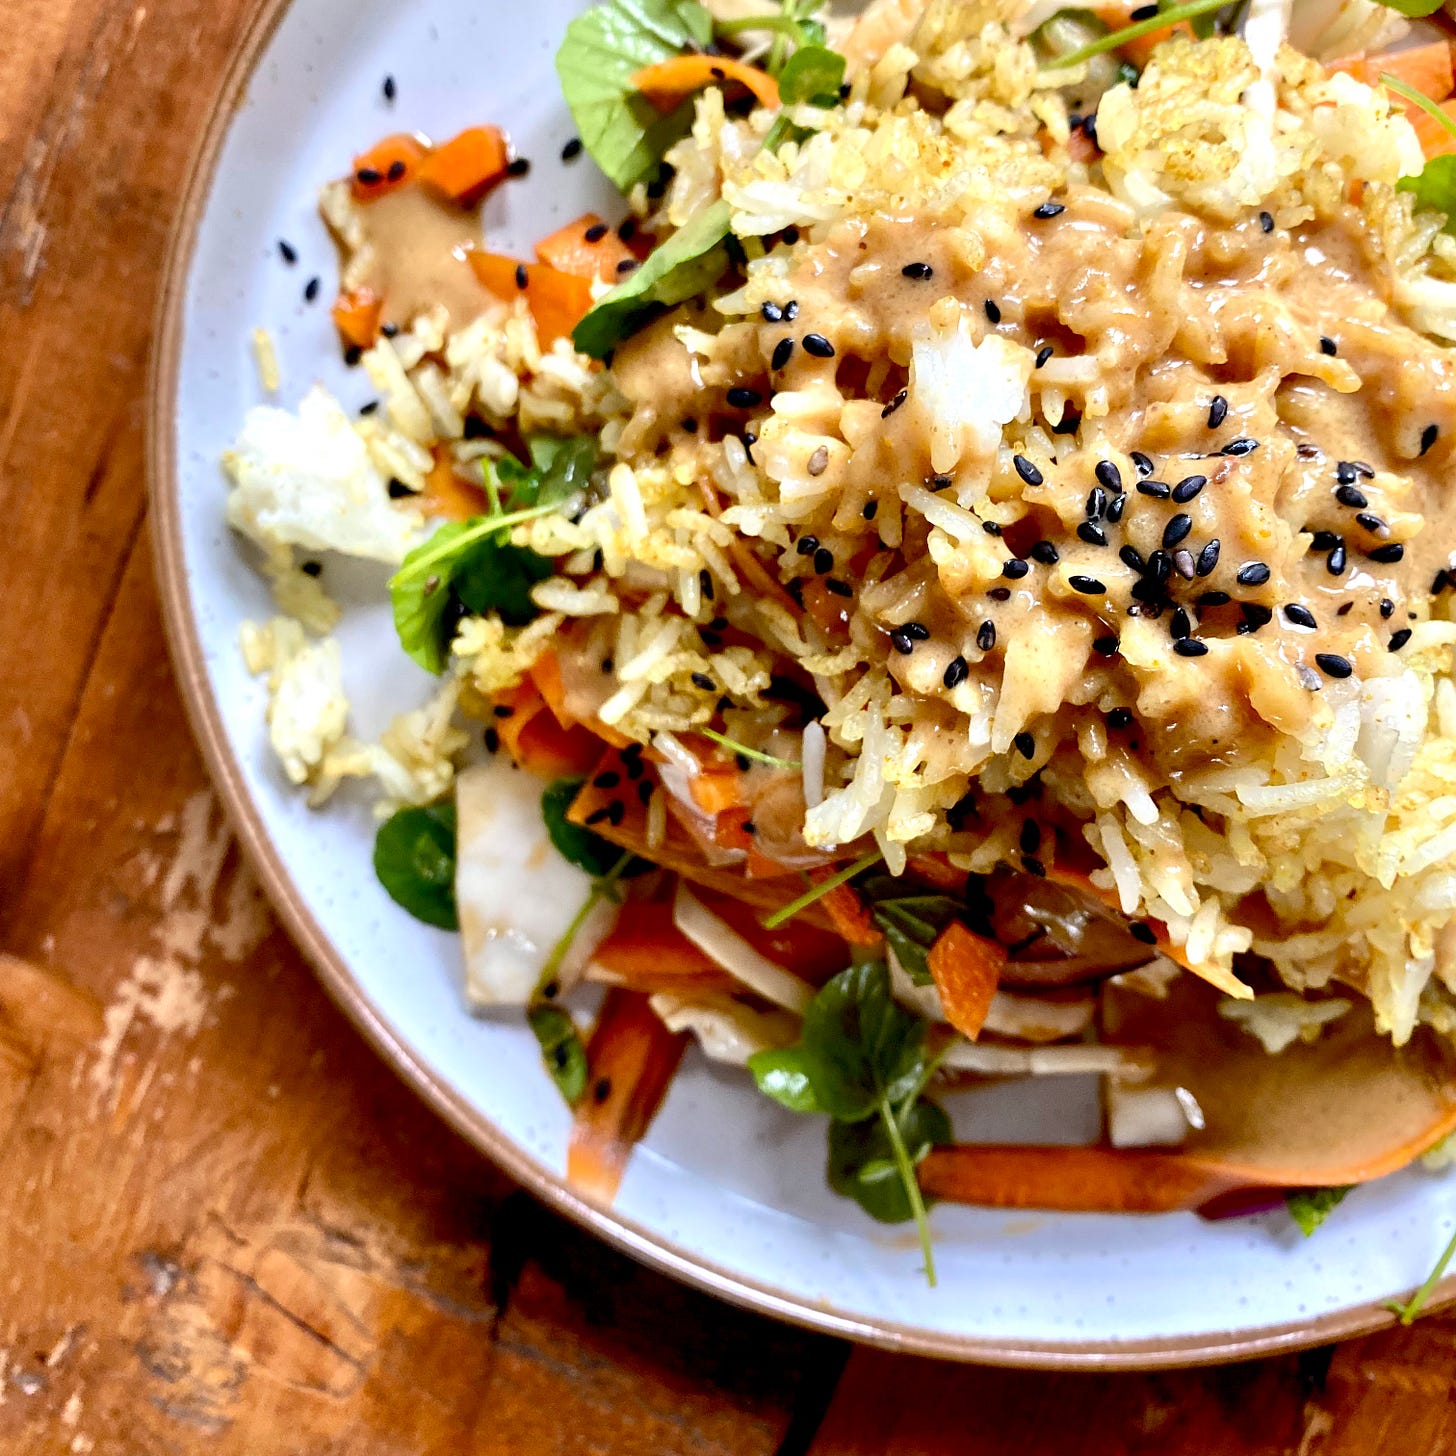 overhead shot of a plate topped with salad consisting of carrots, white cabbage, crispy rice, black sesame seeds, salad leaves and peanut dressing. Plate is a pale colour with a brown edge, placed on top of a wooded table